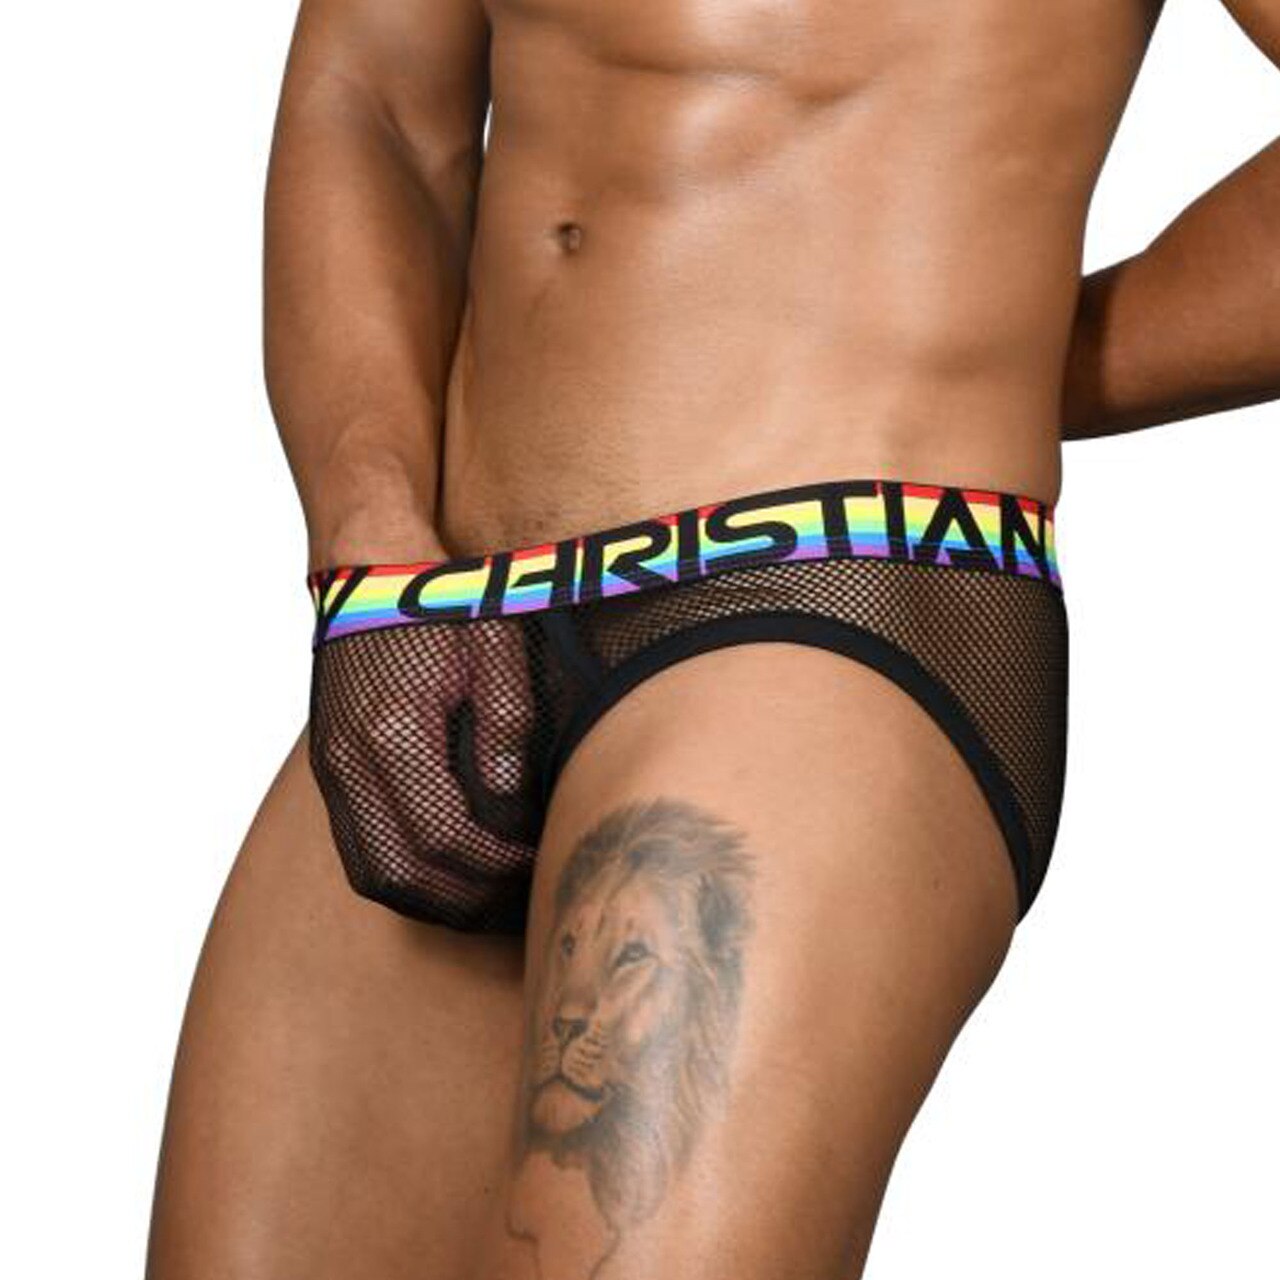 SALE - Mens Andrew Christian Pride Net Mesh Brief w/ Almost Naked